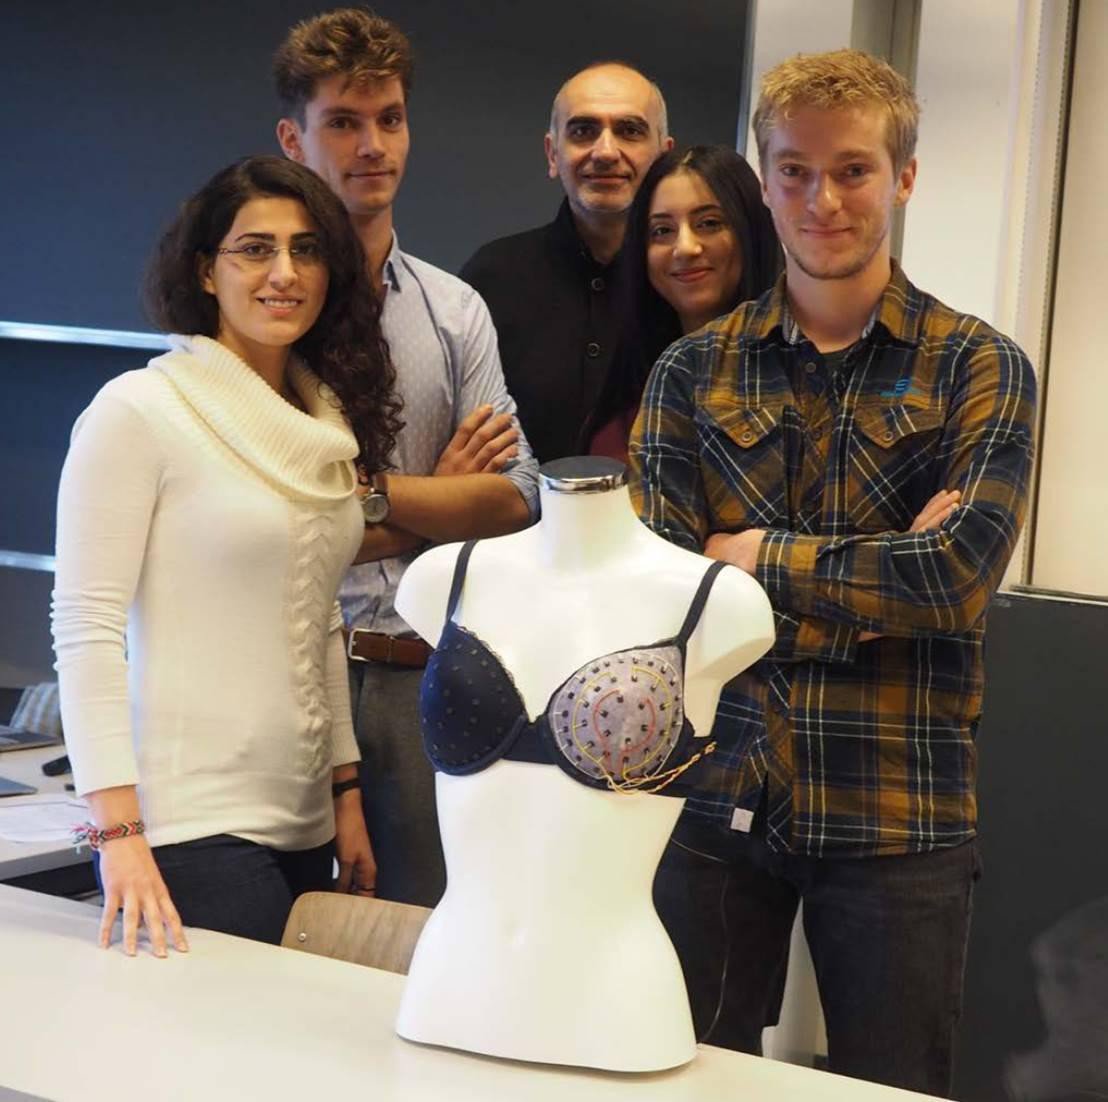 A Bra That Could Get People Talking About Breast Cancer